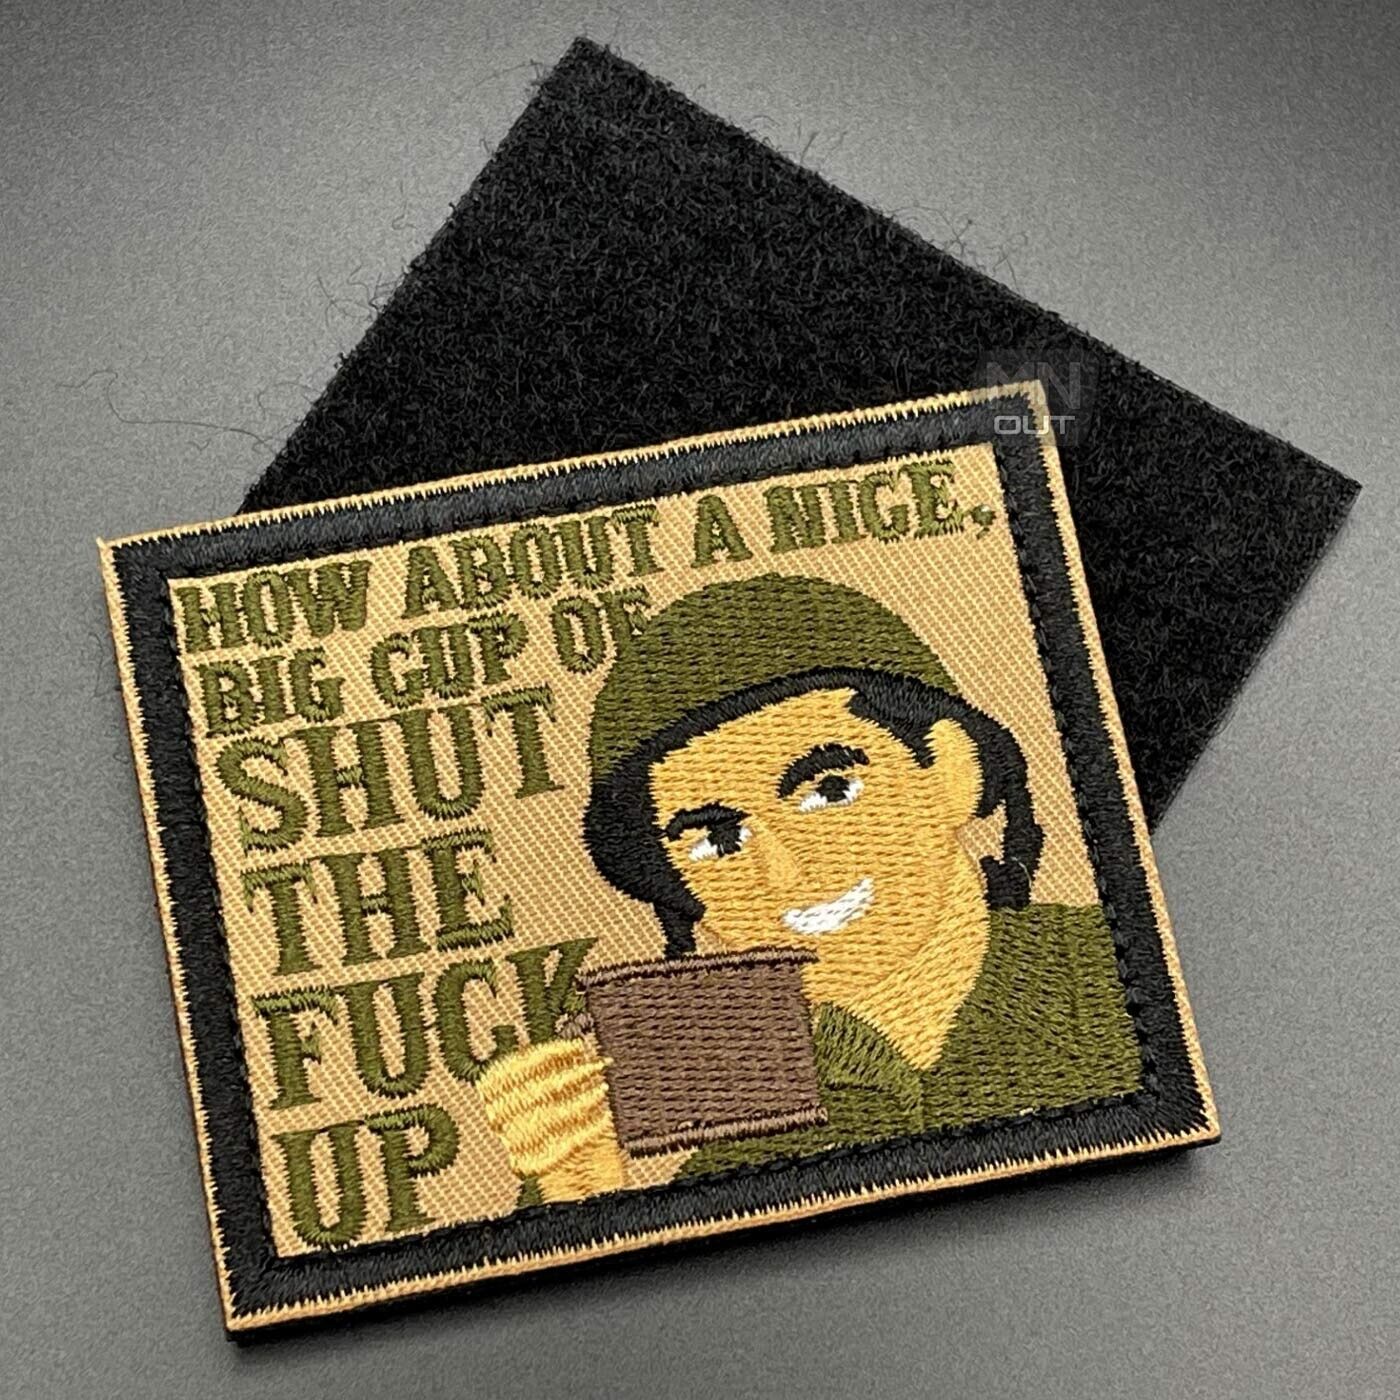 Nice Big Cup of Shut the F**k Up Patch Hook & Loop Morale Military Army Airsoft